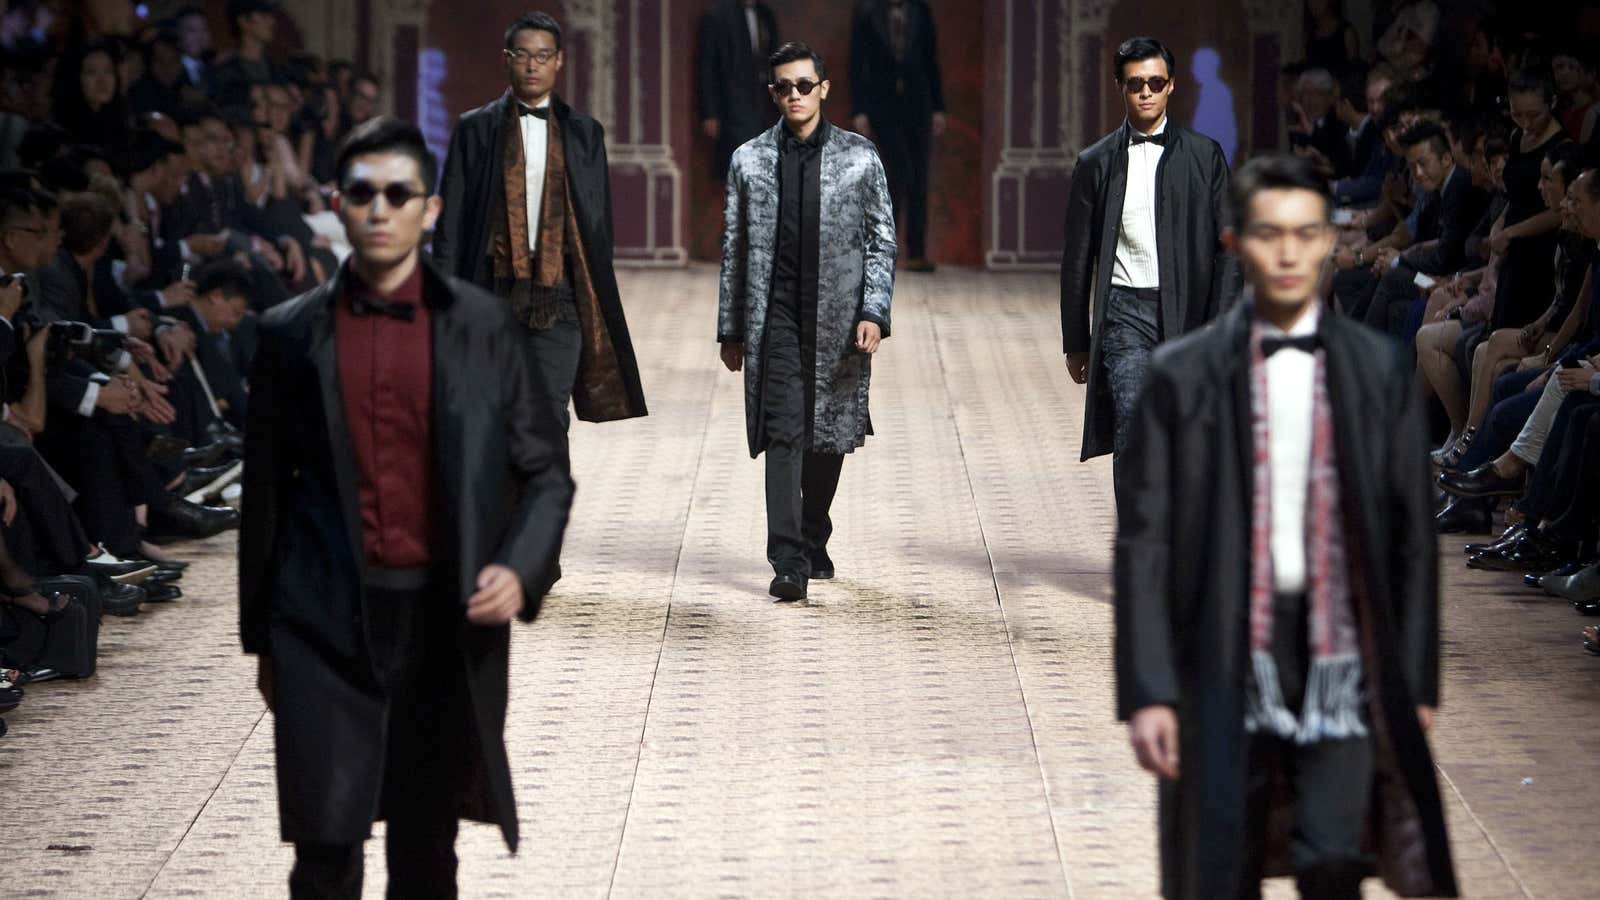 “Moutai no good? How about a Zegna coat?”